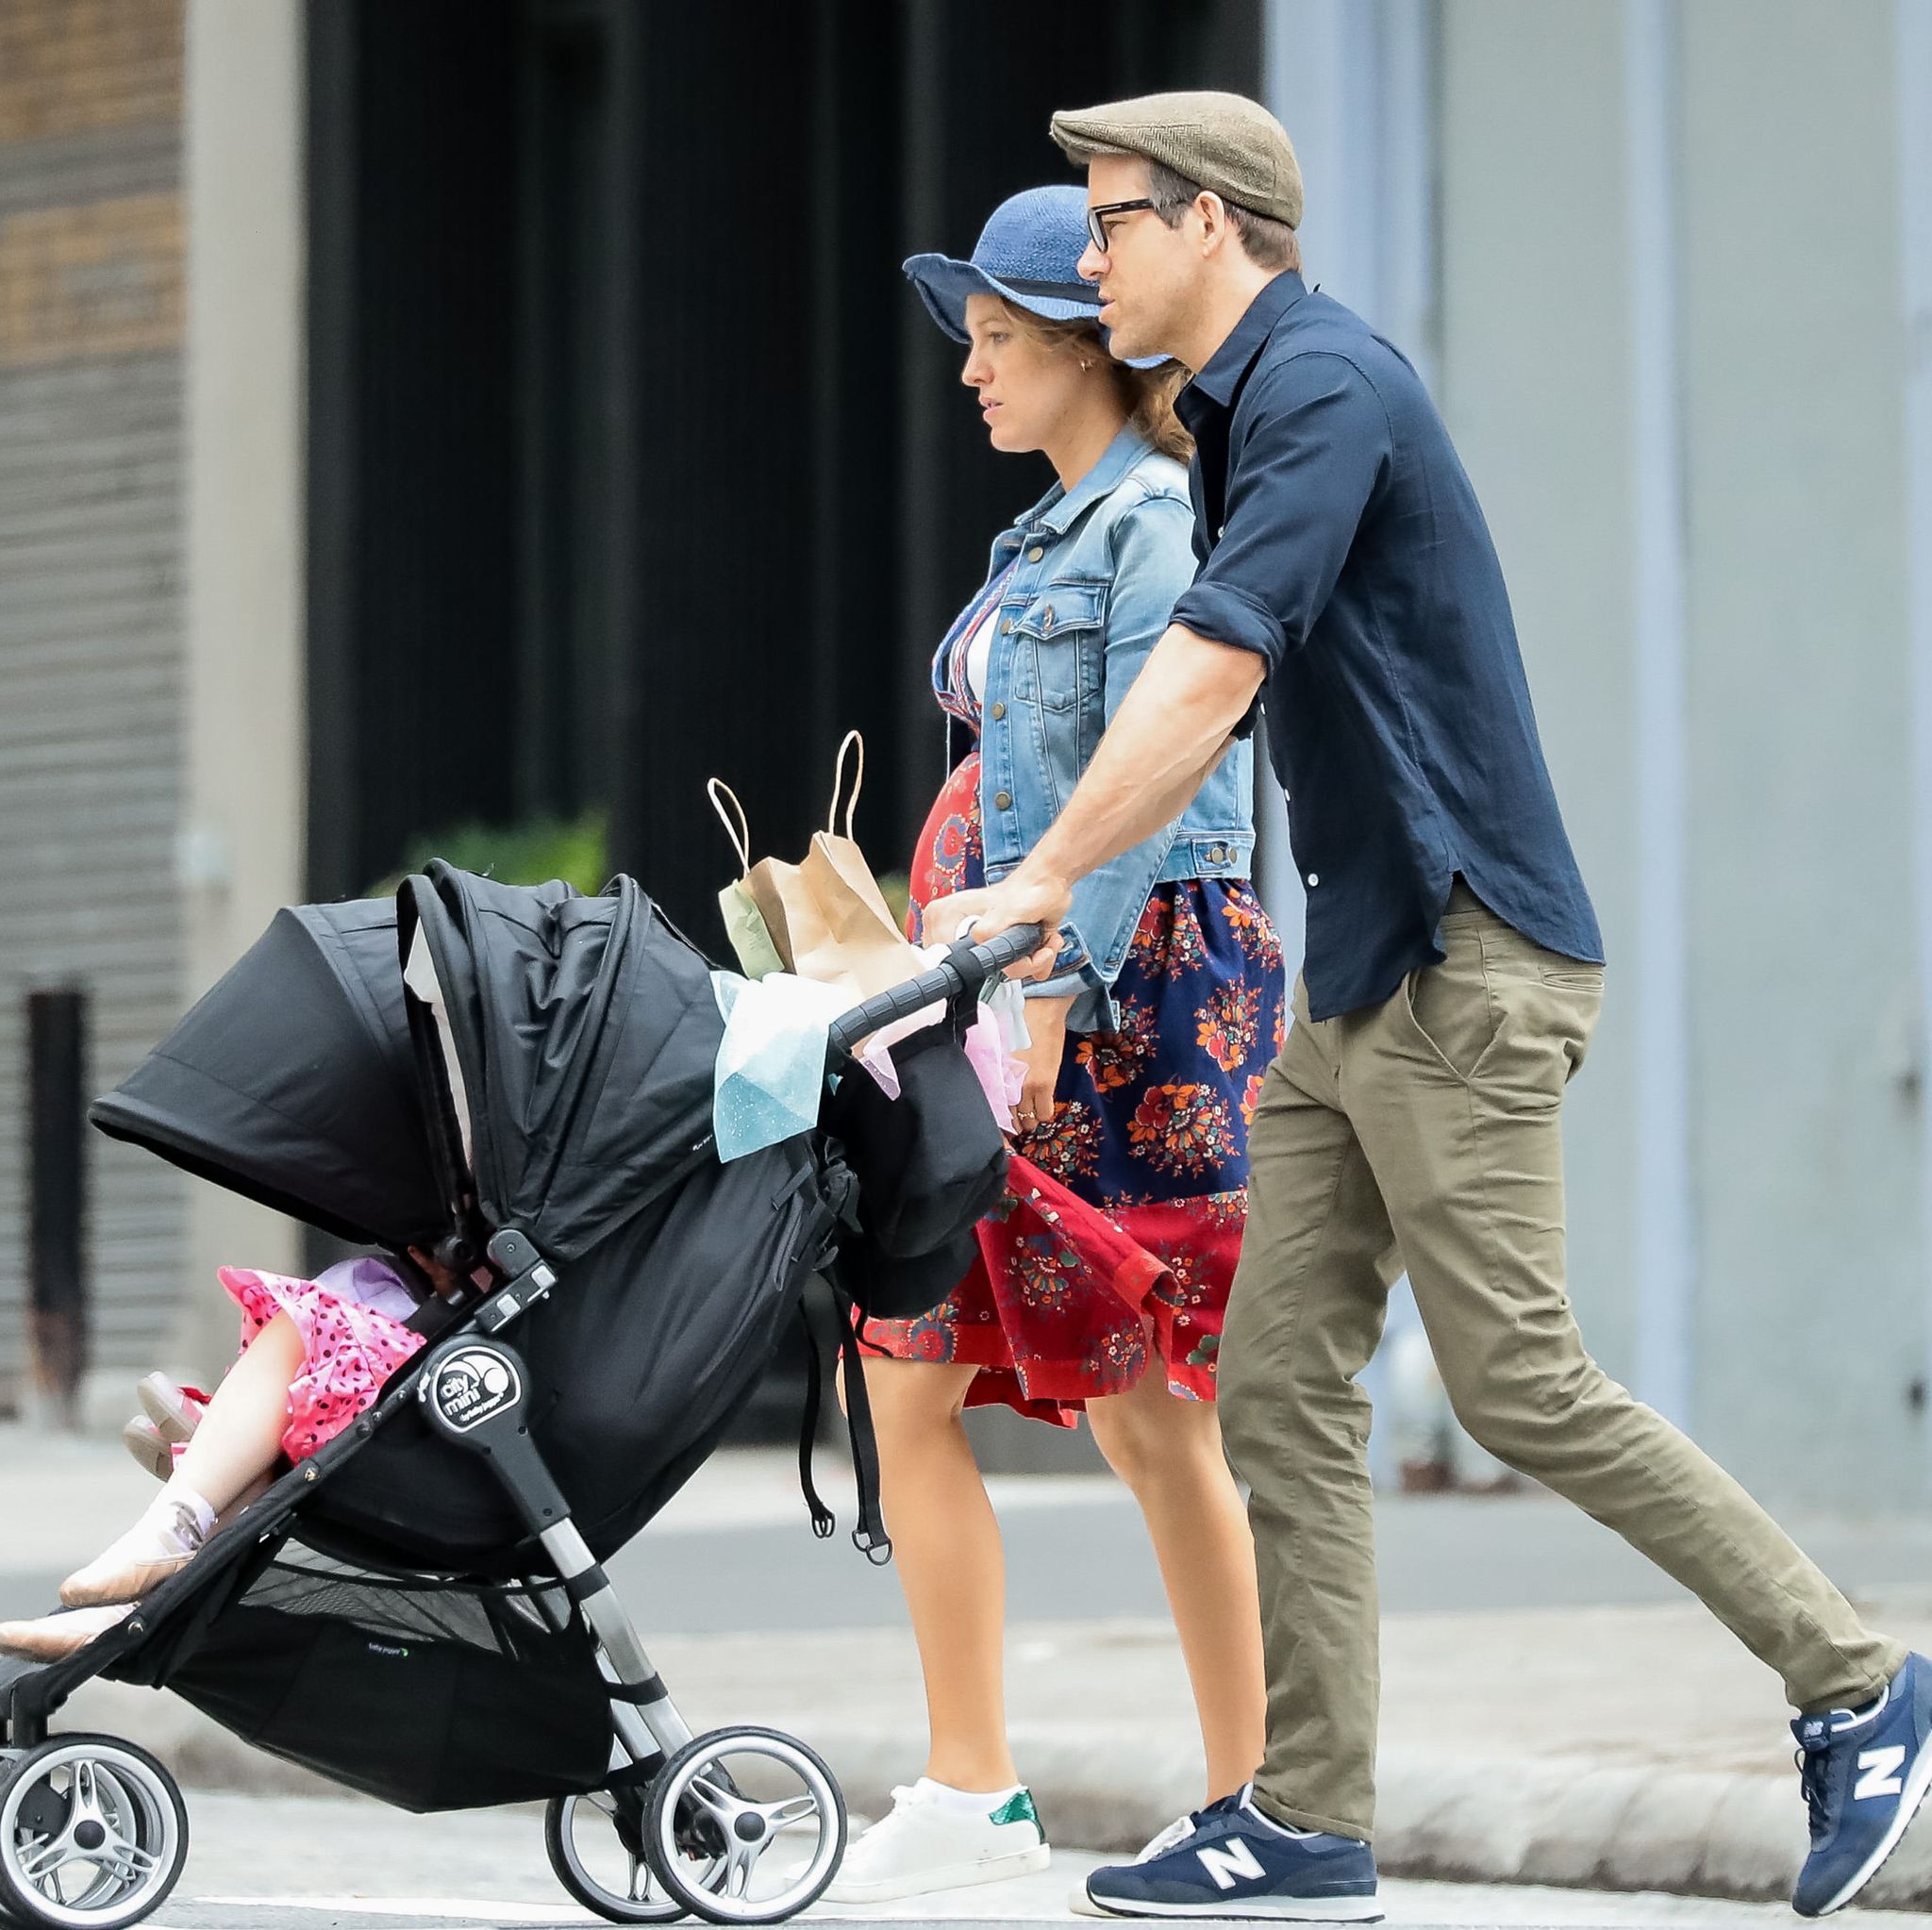 https://hips.hearstapps.com/hmg-prod/images/blake-lively-ryan-reynolds-and-their-daughter-inez-are-seen-news-photo-1150840108-1561107290.jpg?crop=0.715xw:1.00xh;0.112xw,0&resize=2048:*